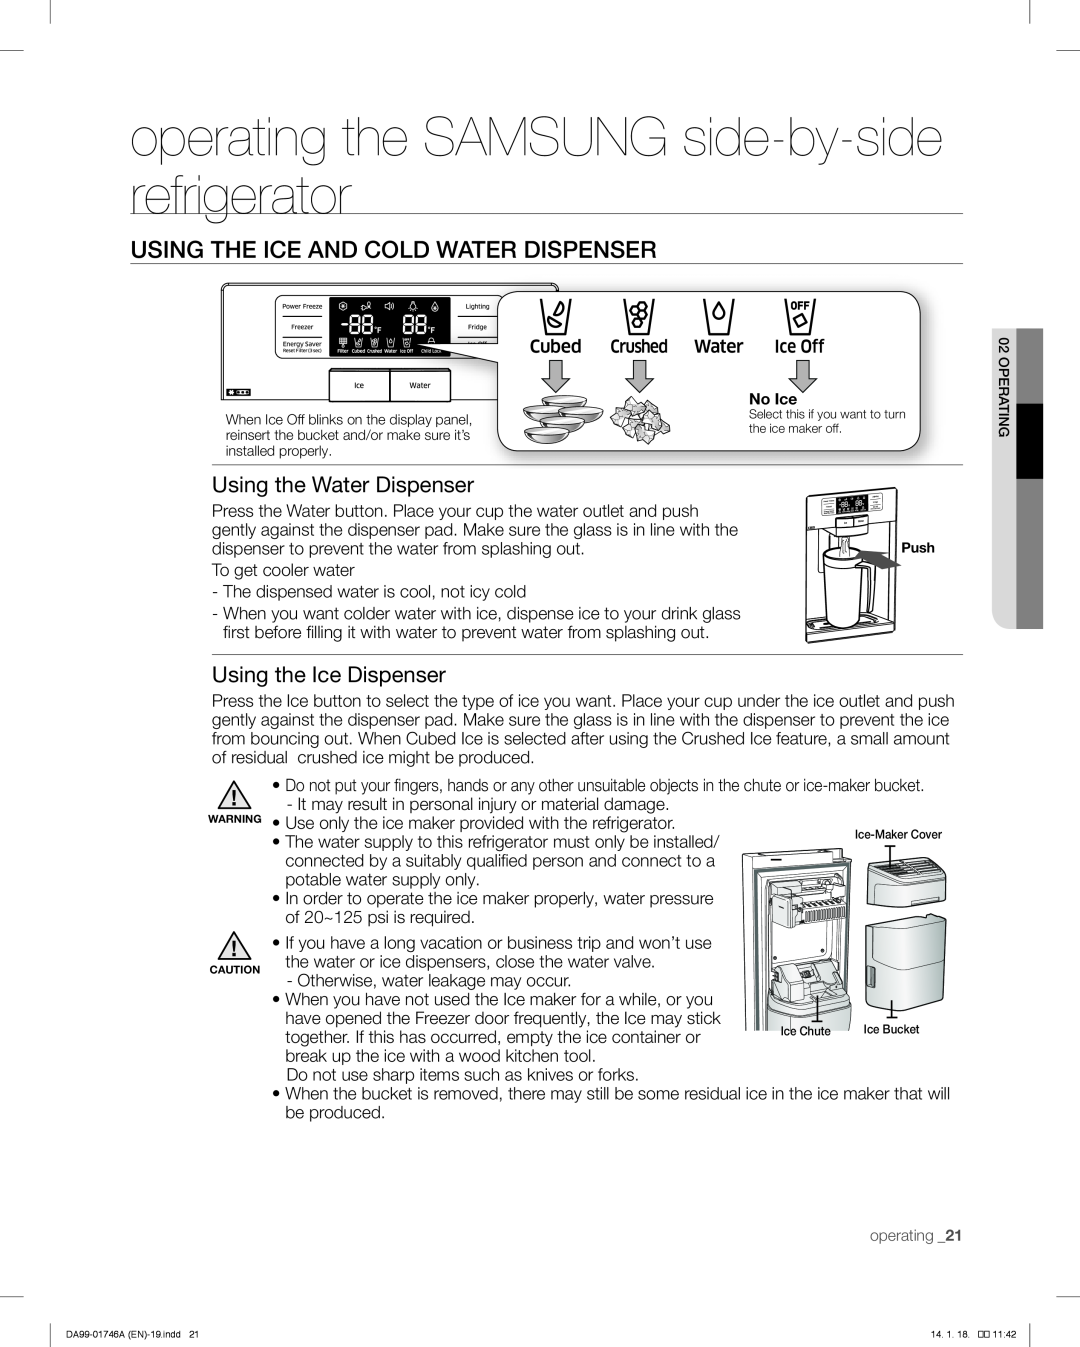 Samsung RSG257AA user manual Using The Ice And Cold Water Dispenser, Using the Water Dispenser, Using the Ice Dispenser 